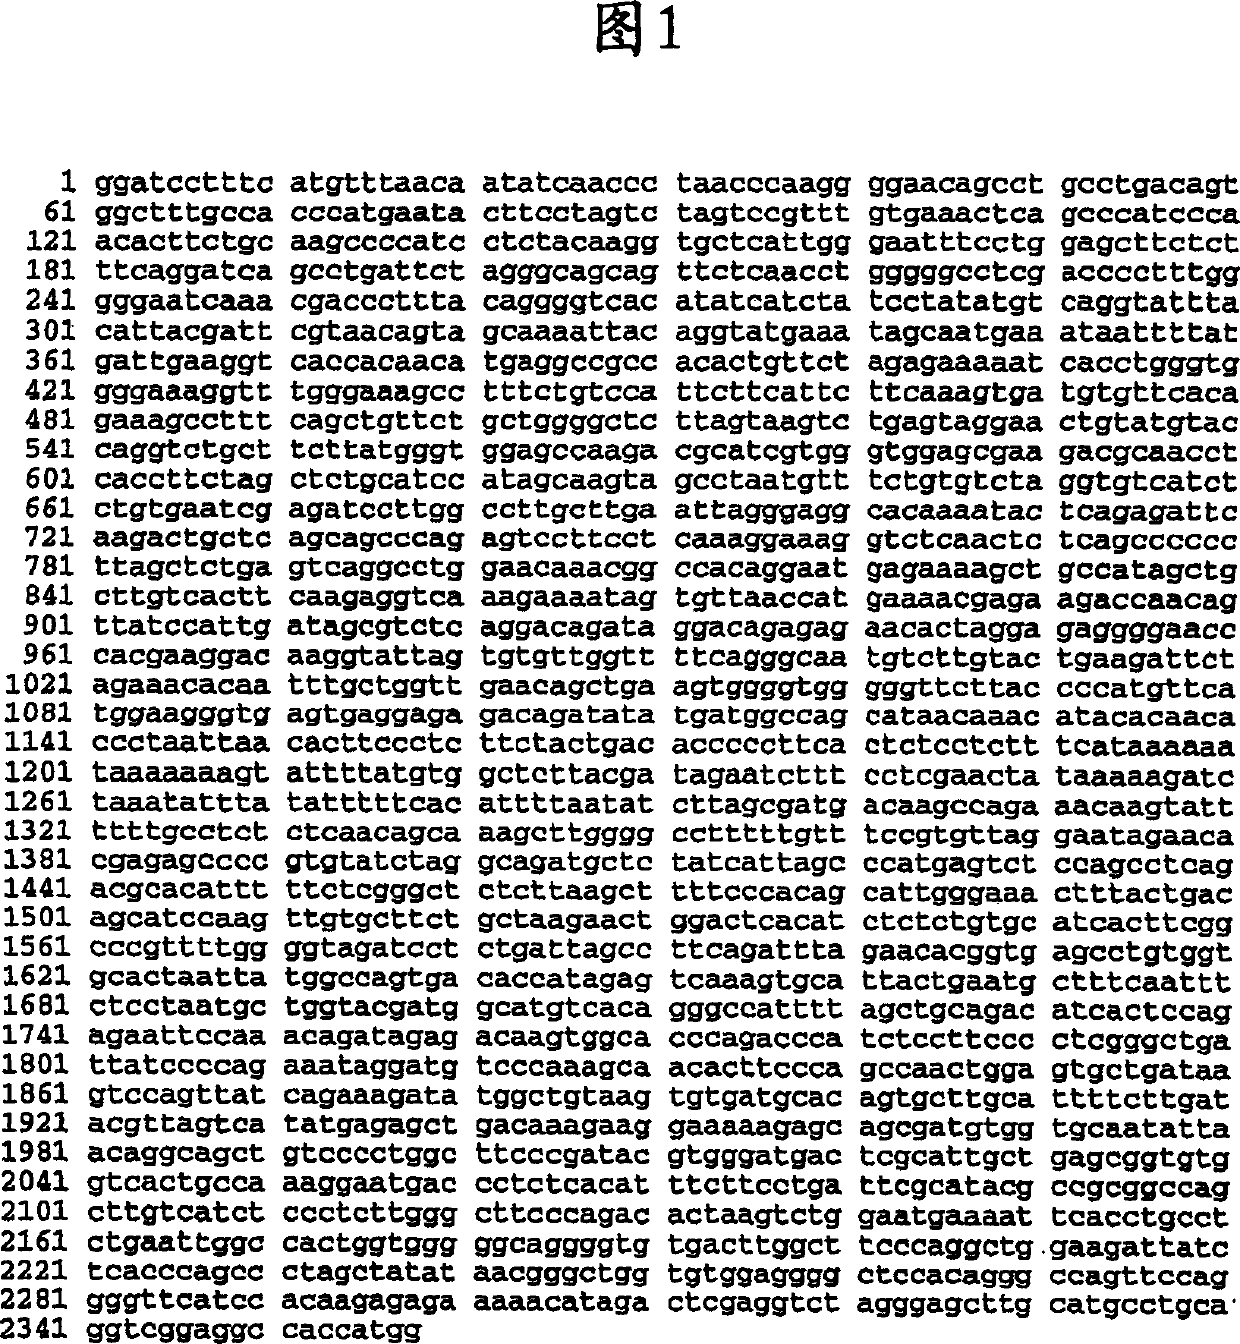 Heart ankyrin repeat protein gene upstream sequence, carrier containing the same sequence and usage thereof